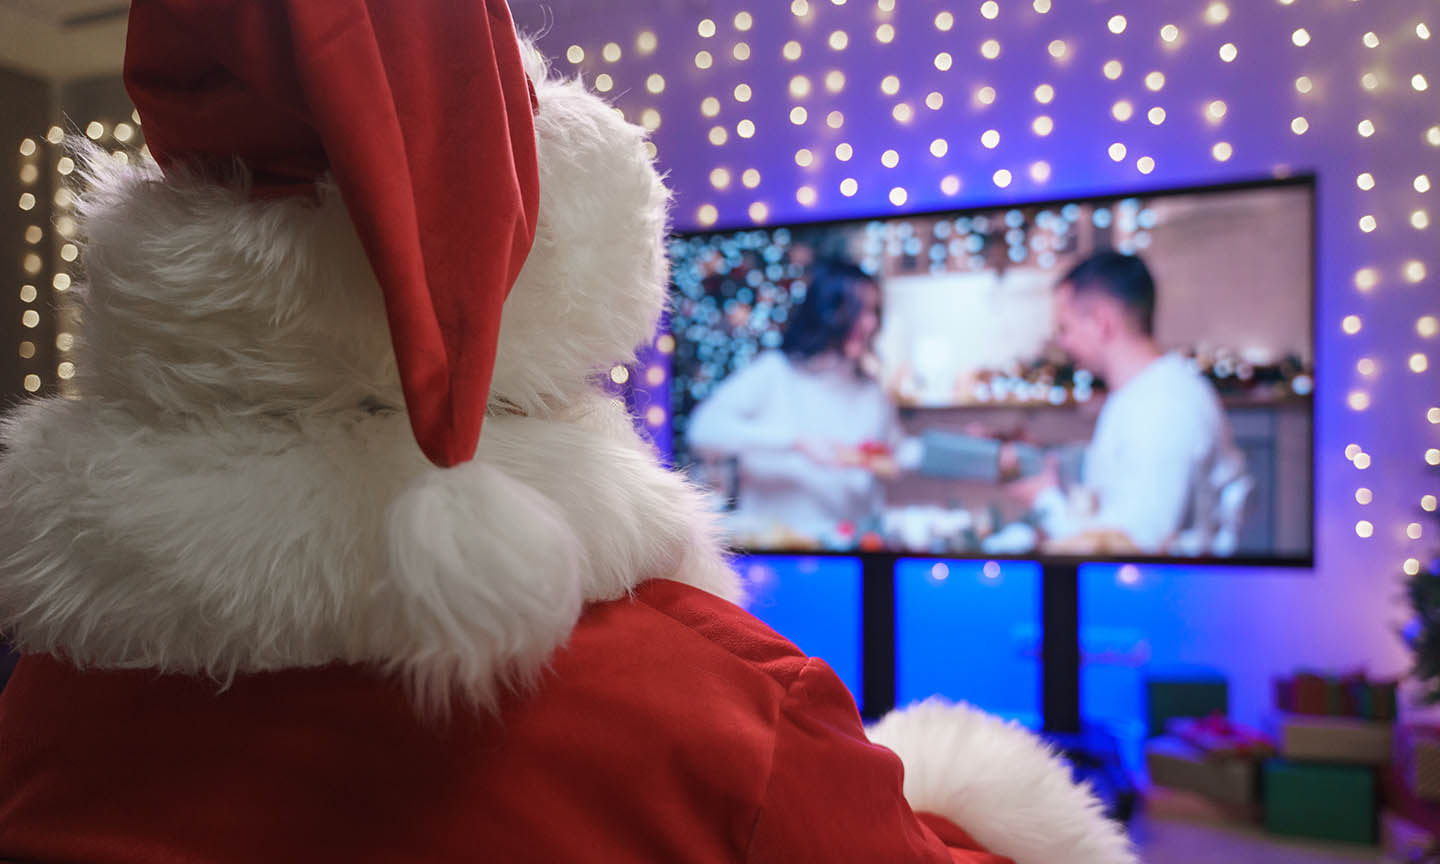 19 of the Best Christmas Movies, Books & More